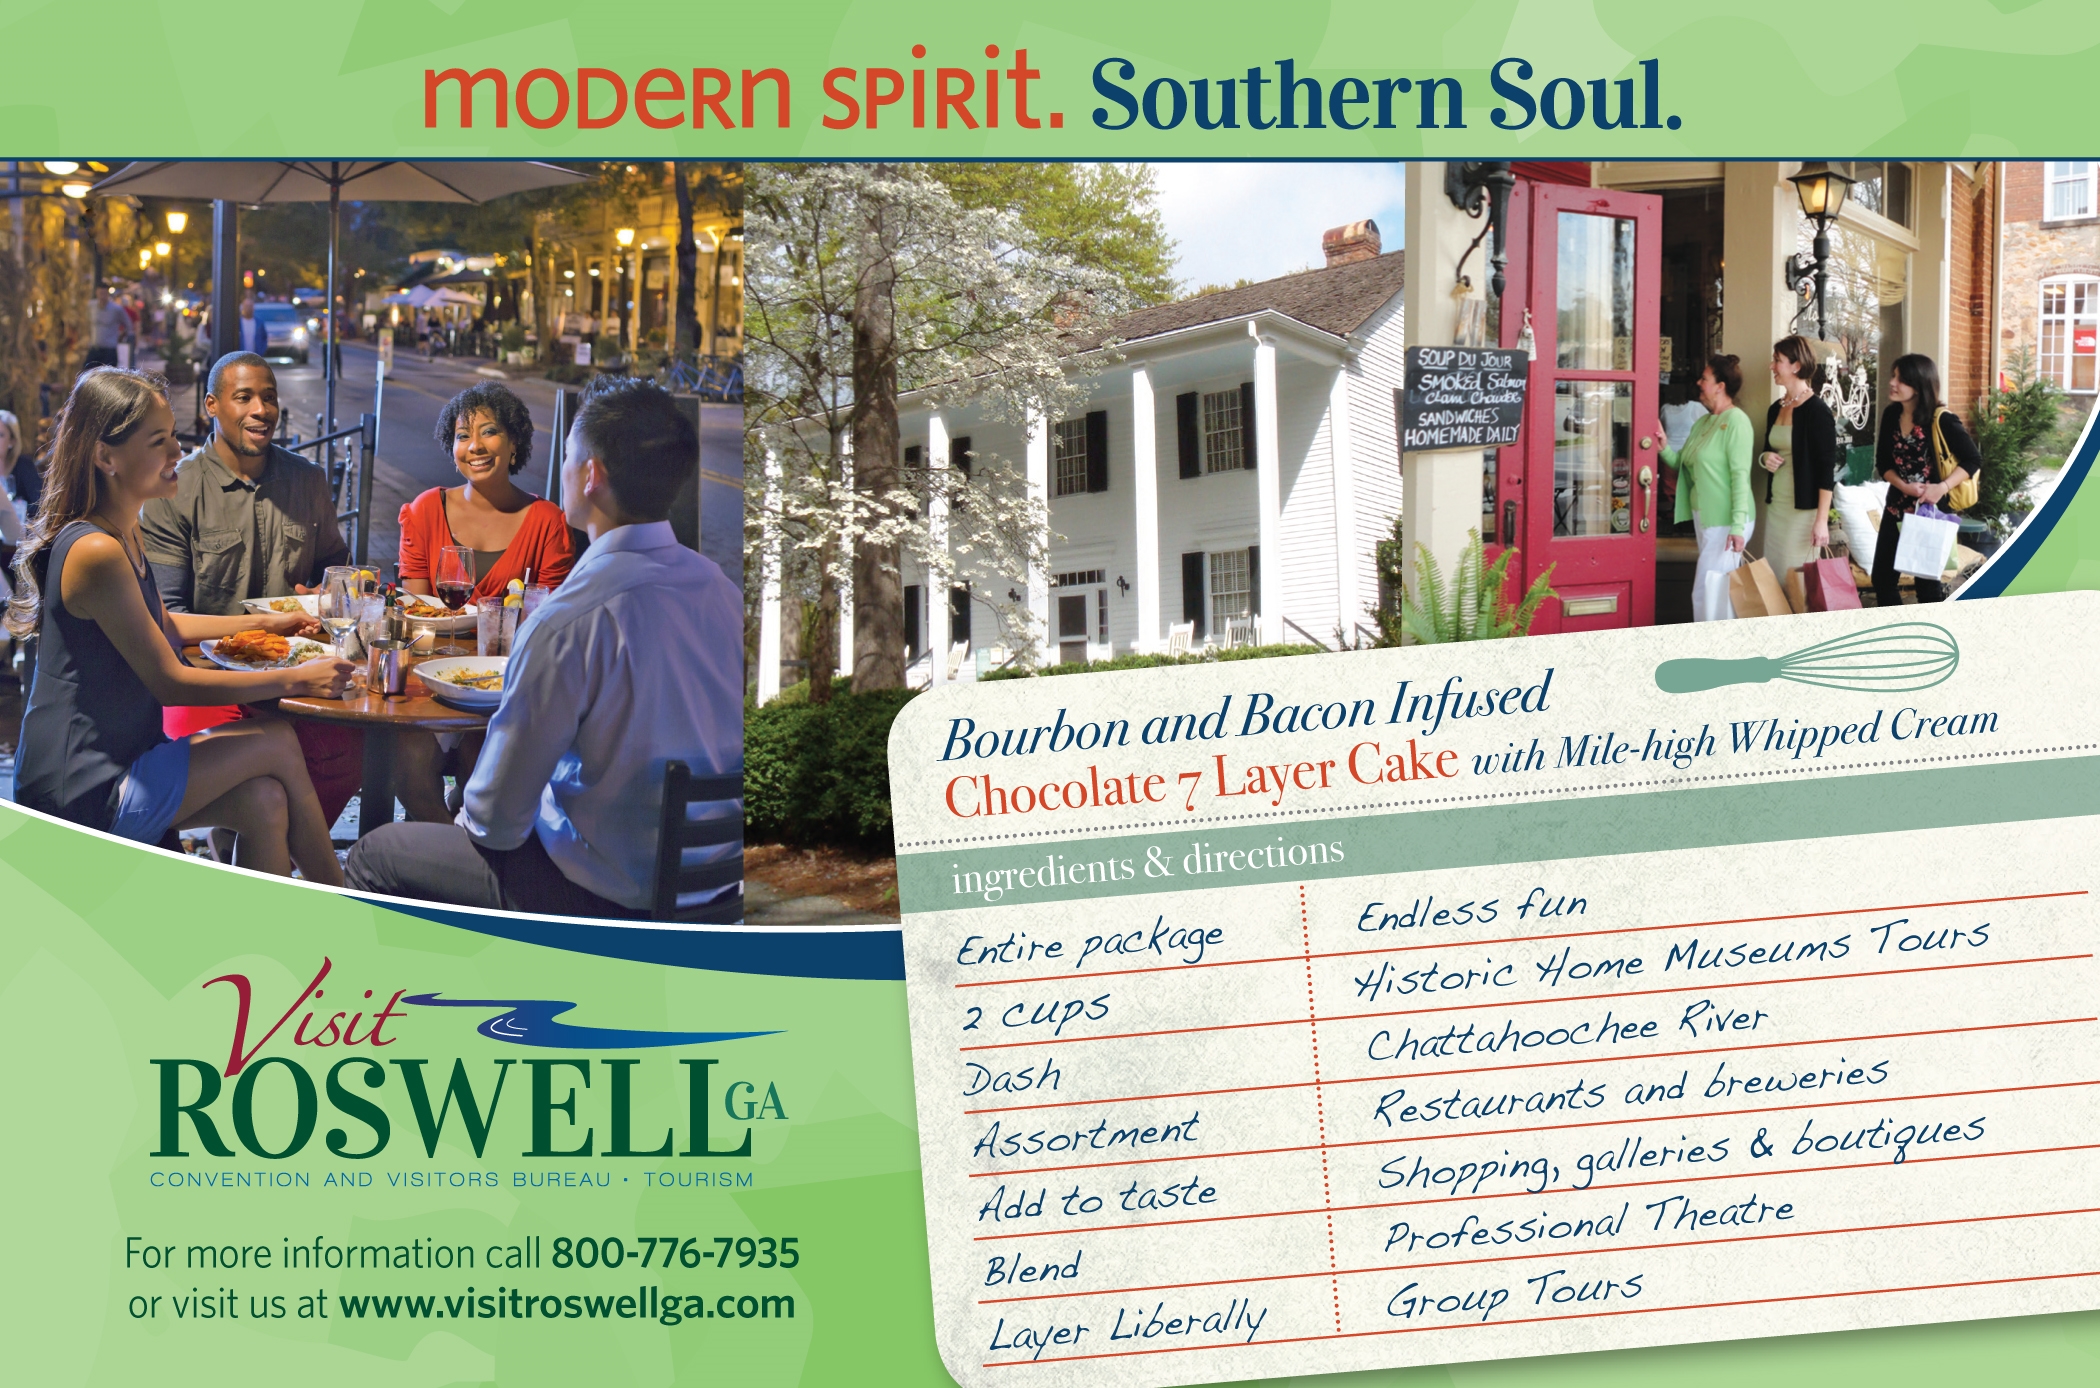 Visit Roswell GA Convention And Visitors Bureau